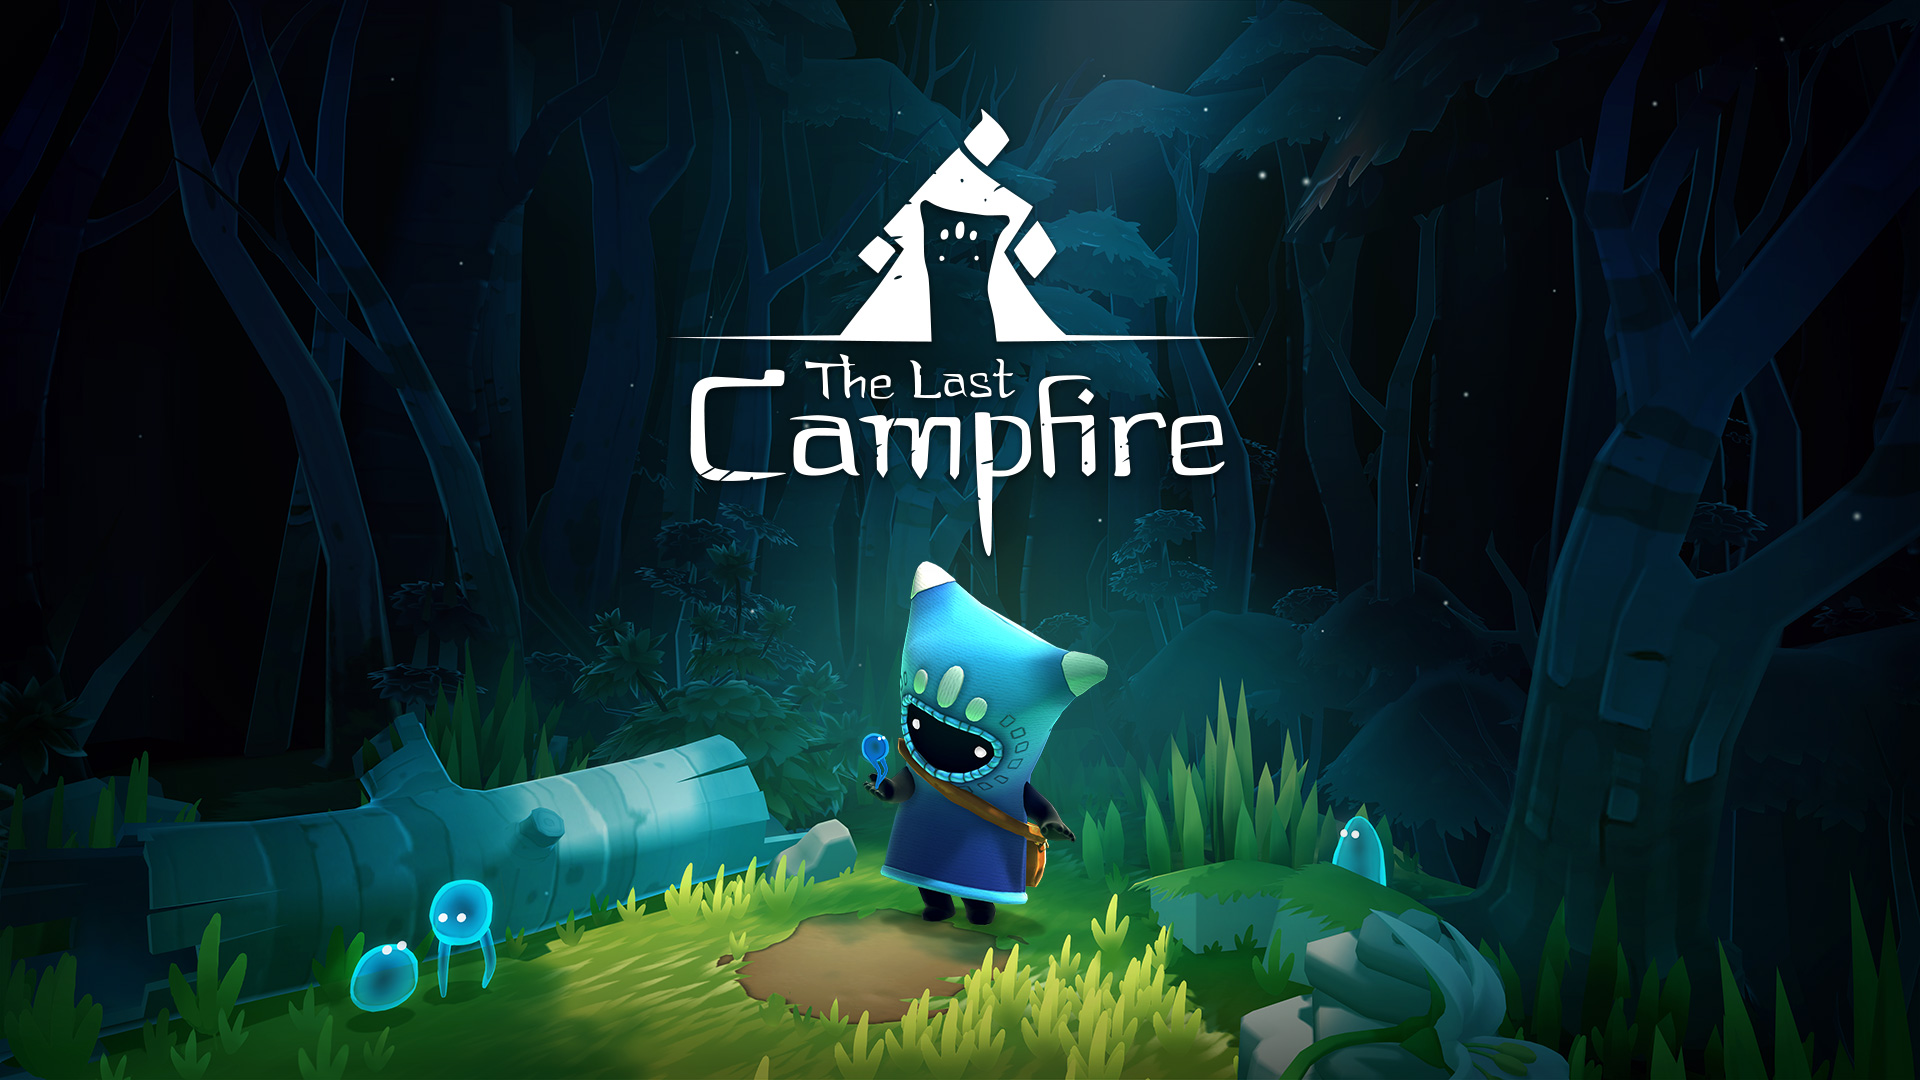 Video For The Last Campfire, from Developer Hello Games, is Available Now on Xbox One